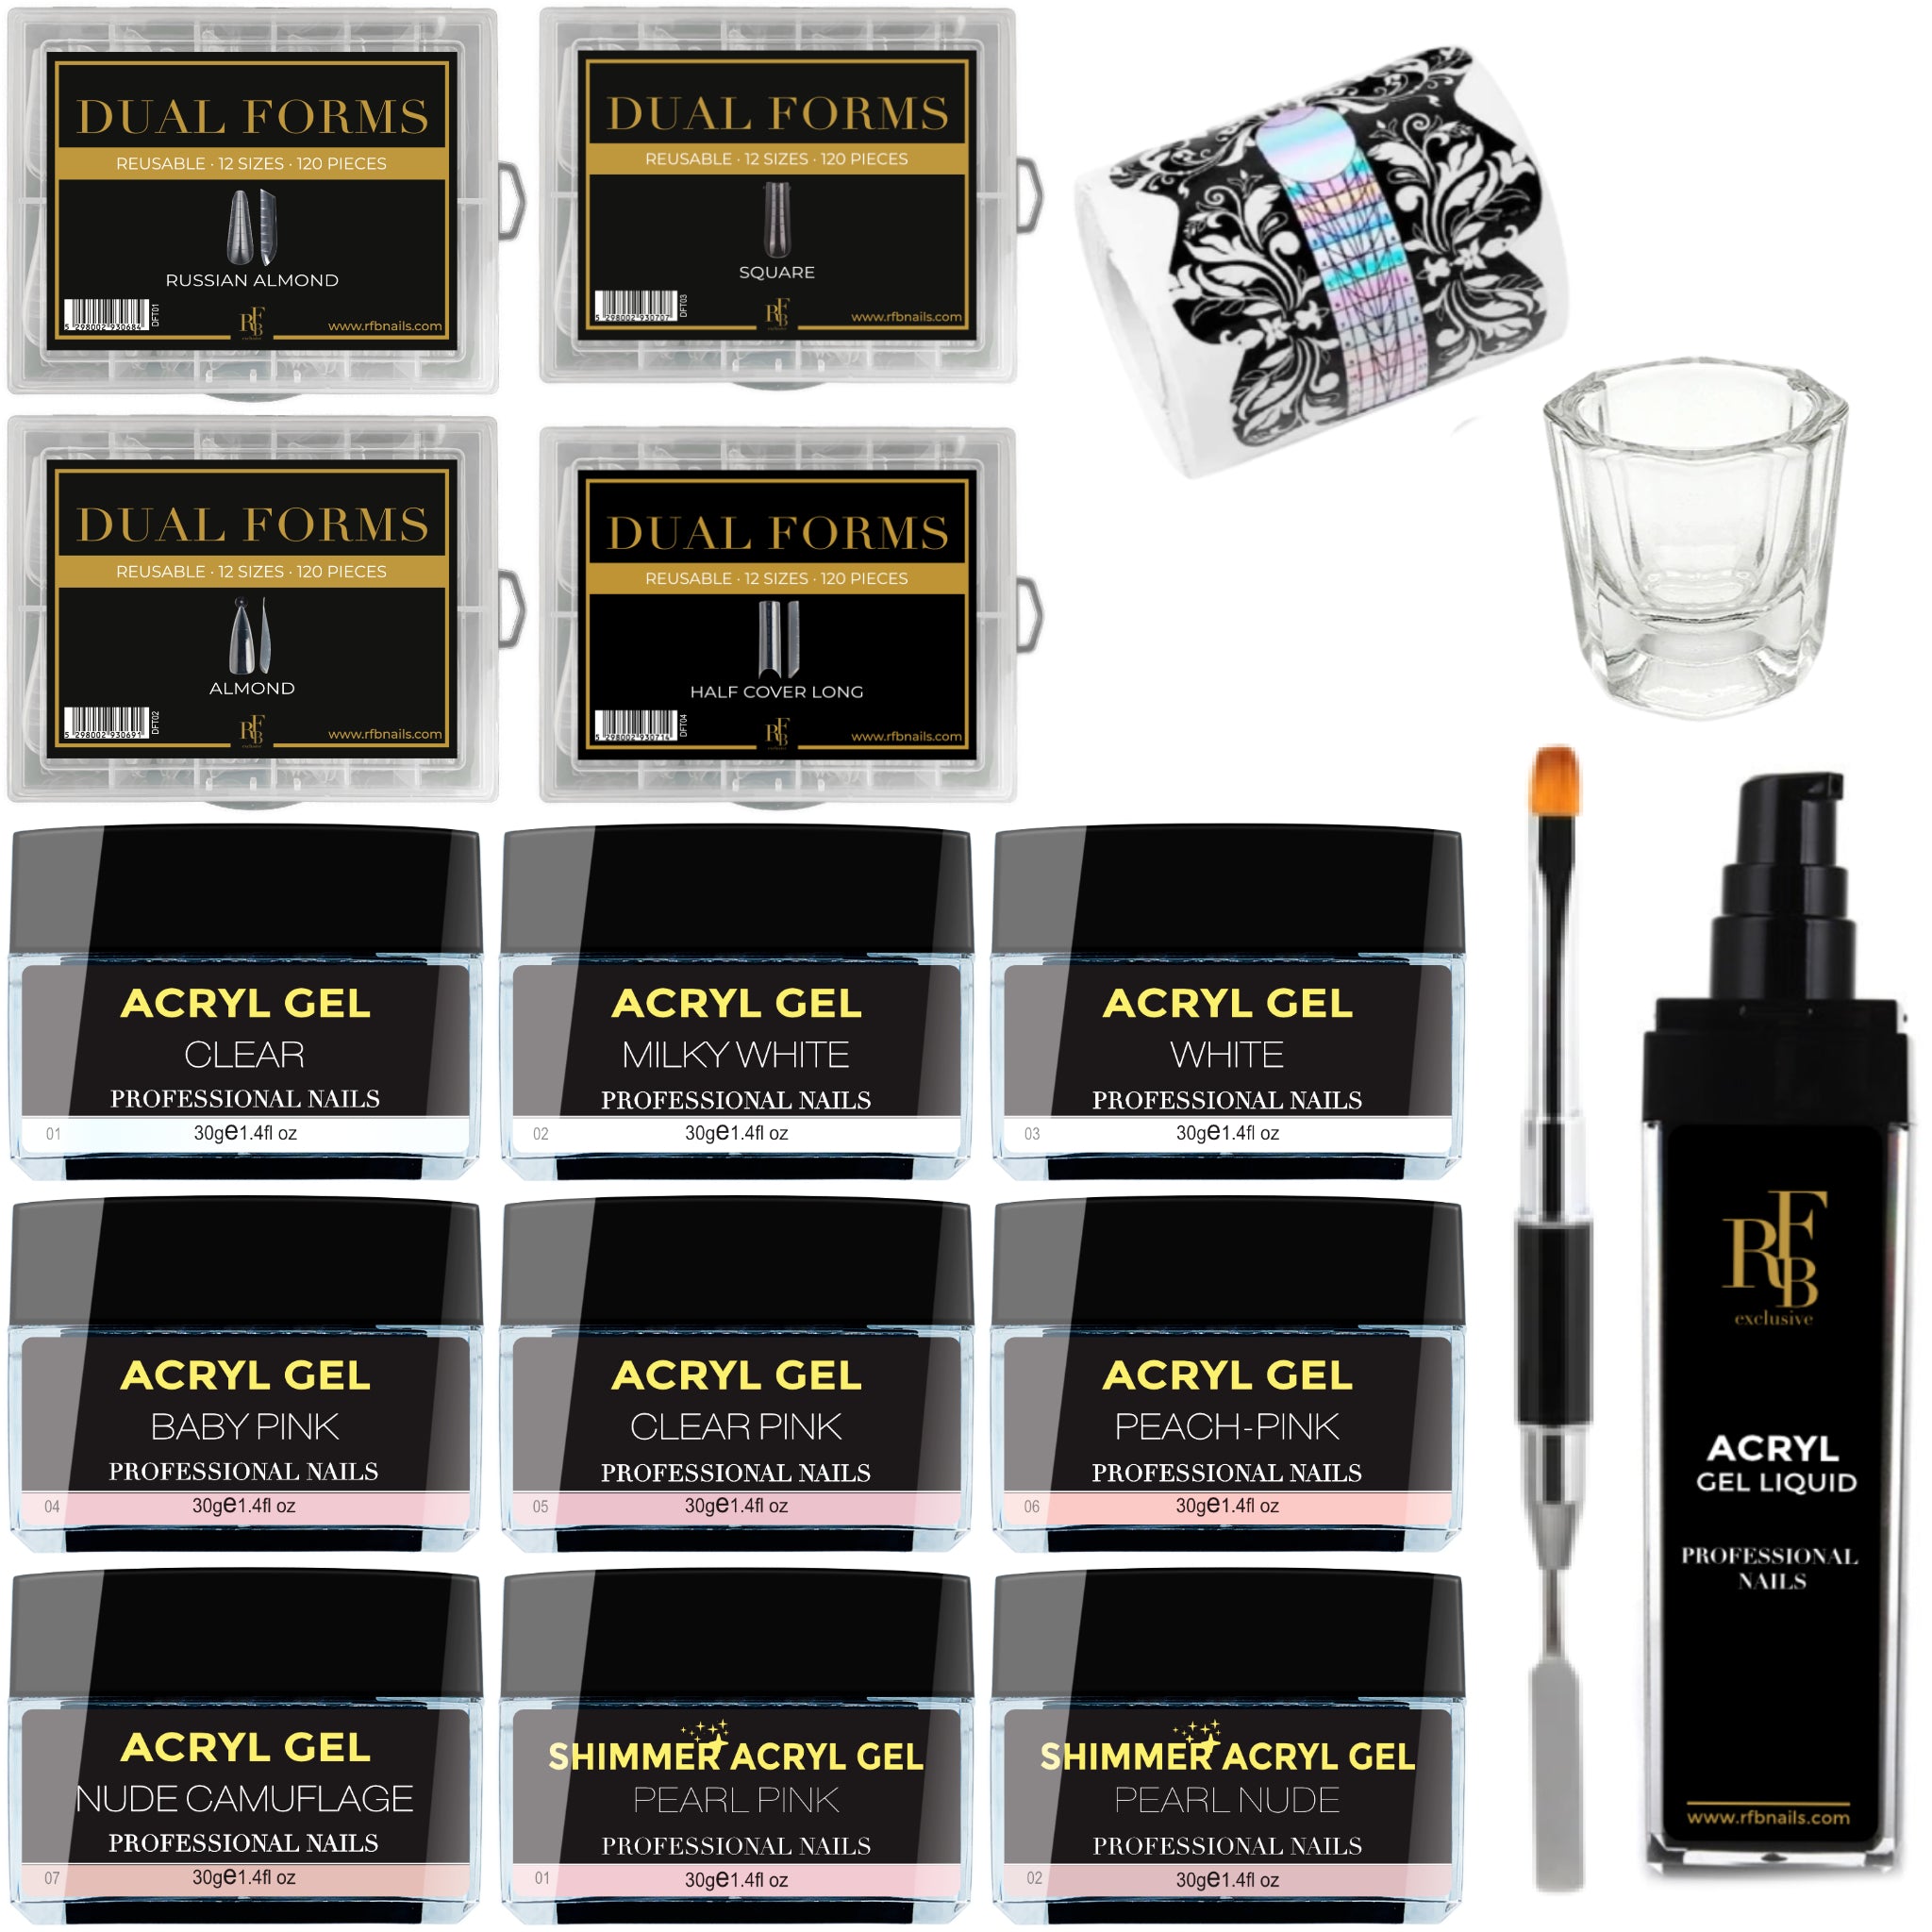 Acryl Gel Master Collection